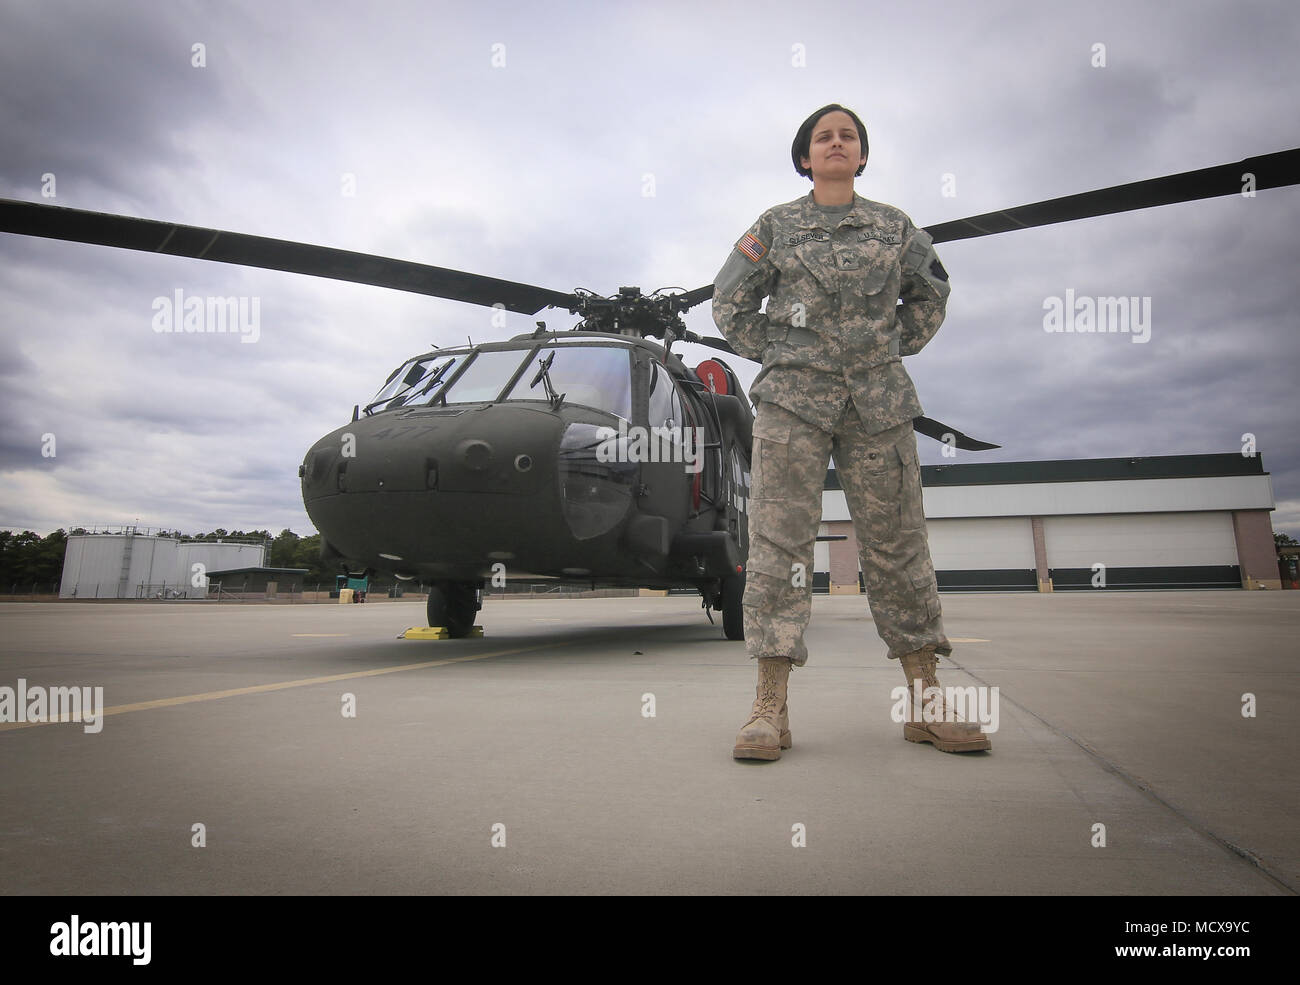 U.S. Army National Guard Cpl. Melinda Gulsever stands for a portrait with a UH-60L Black Hawk helicopter at the New Jersey National Guard's Army Aviation Support Facility, Joint Base McGuire-Dix-Lakehurst, N.J., March 5, 2018. Gulsever is an egine mechanic, and is also the head brewer for Backwards Flag Brewing Co. (U.S. Air National Guard photo by Master Sgt. Matt Hecht) Stock Photo